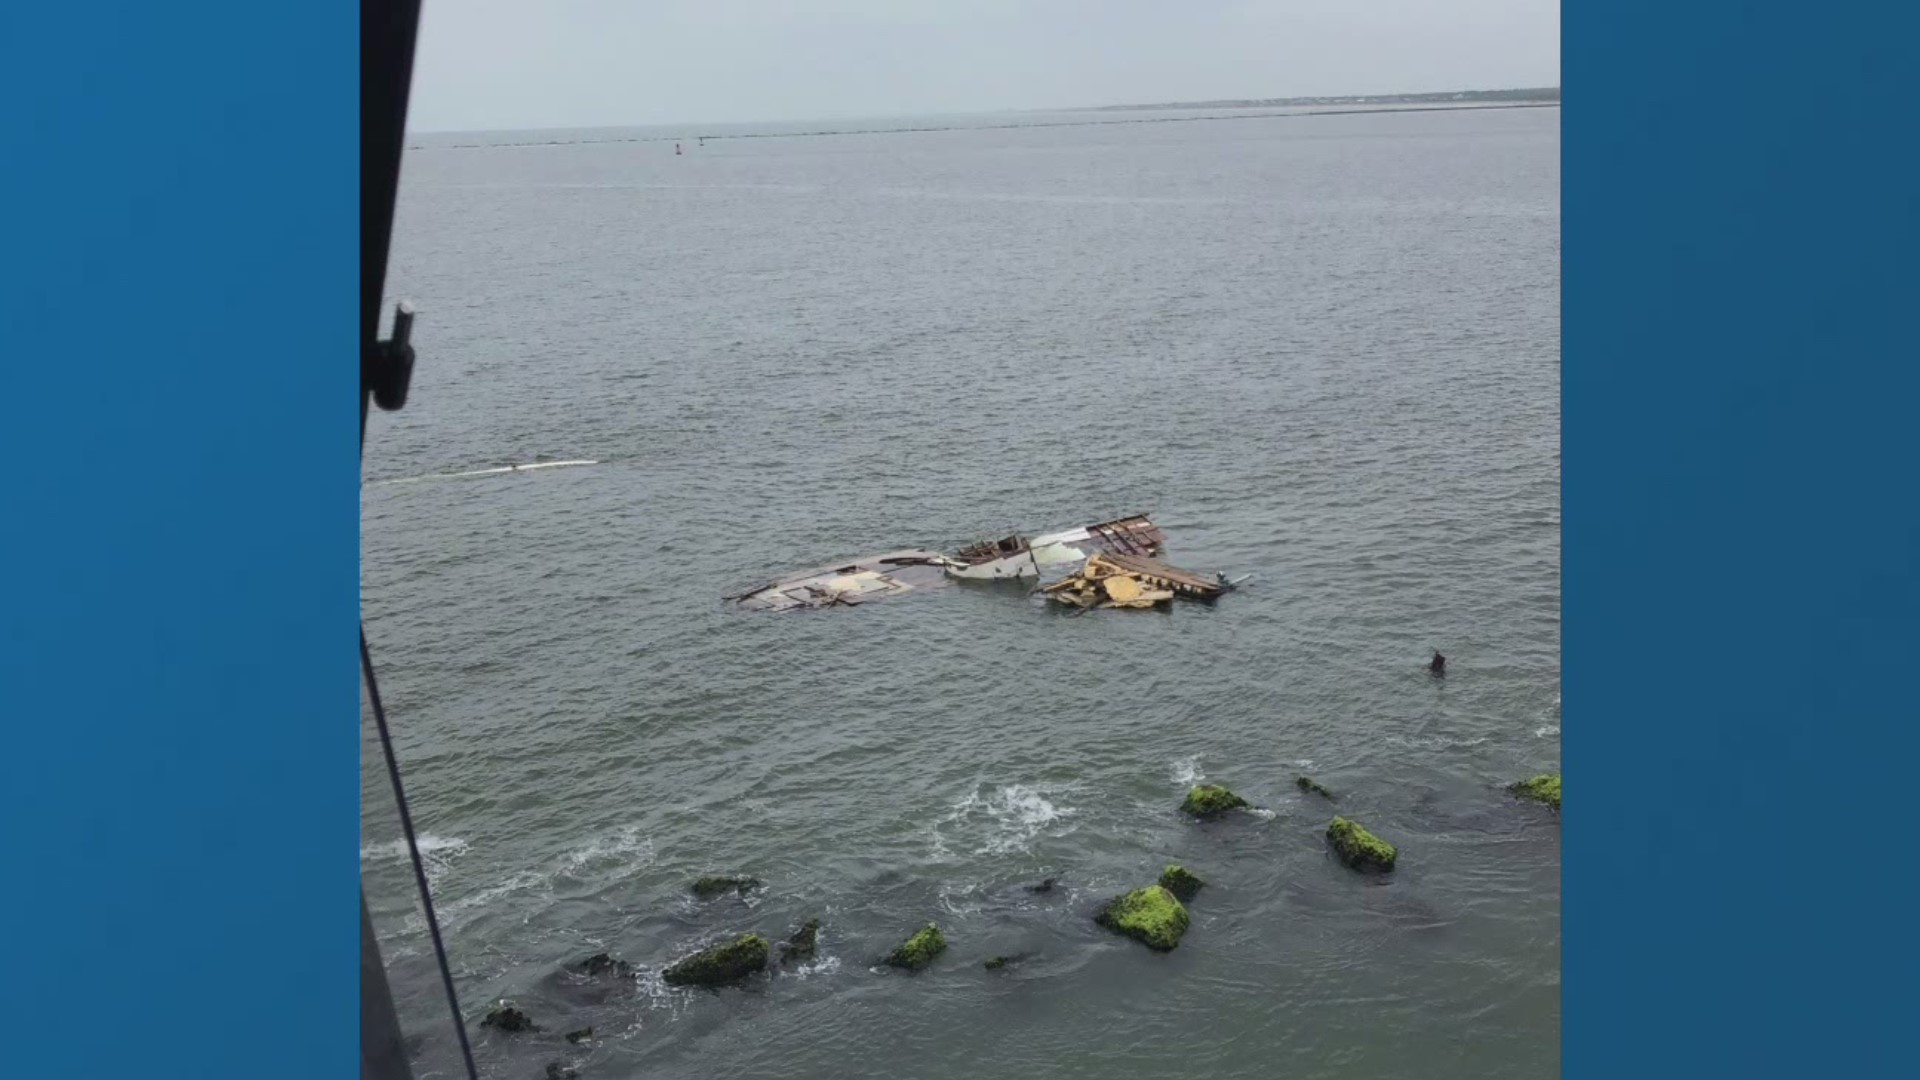 The boat crashed into the jetties on June 9. Three people had to be rescued. The owner has not cleaned the wreck, though it is their responsibility.